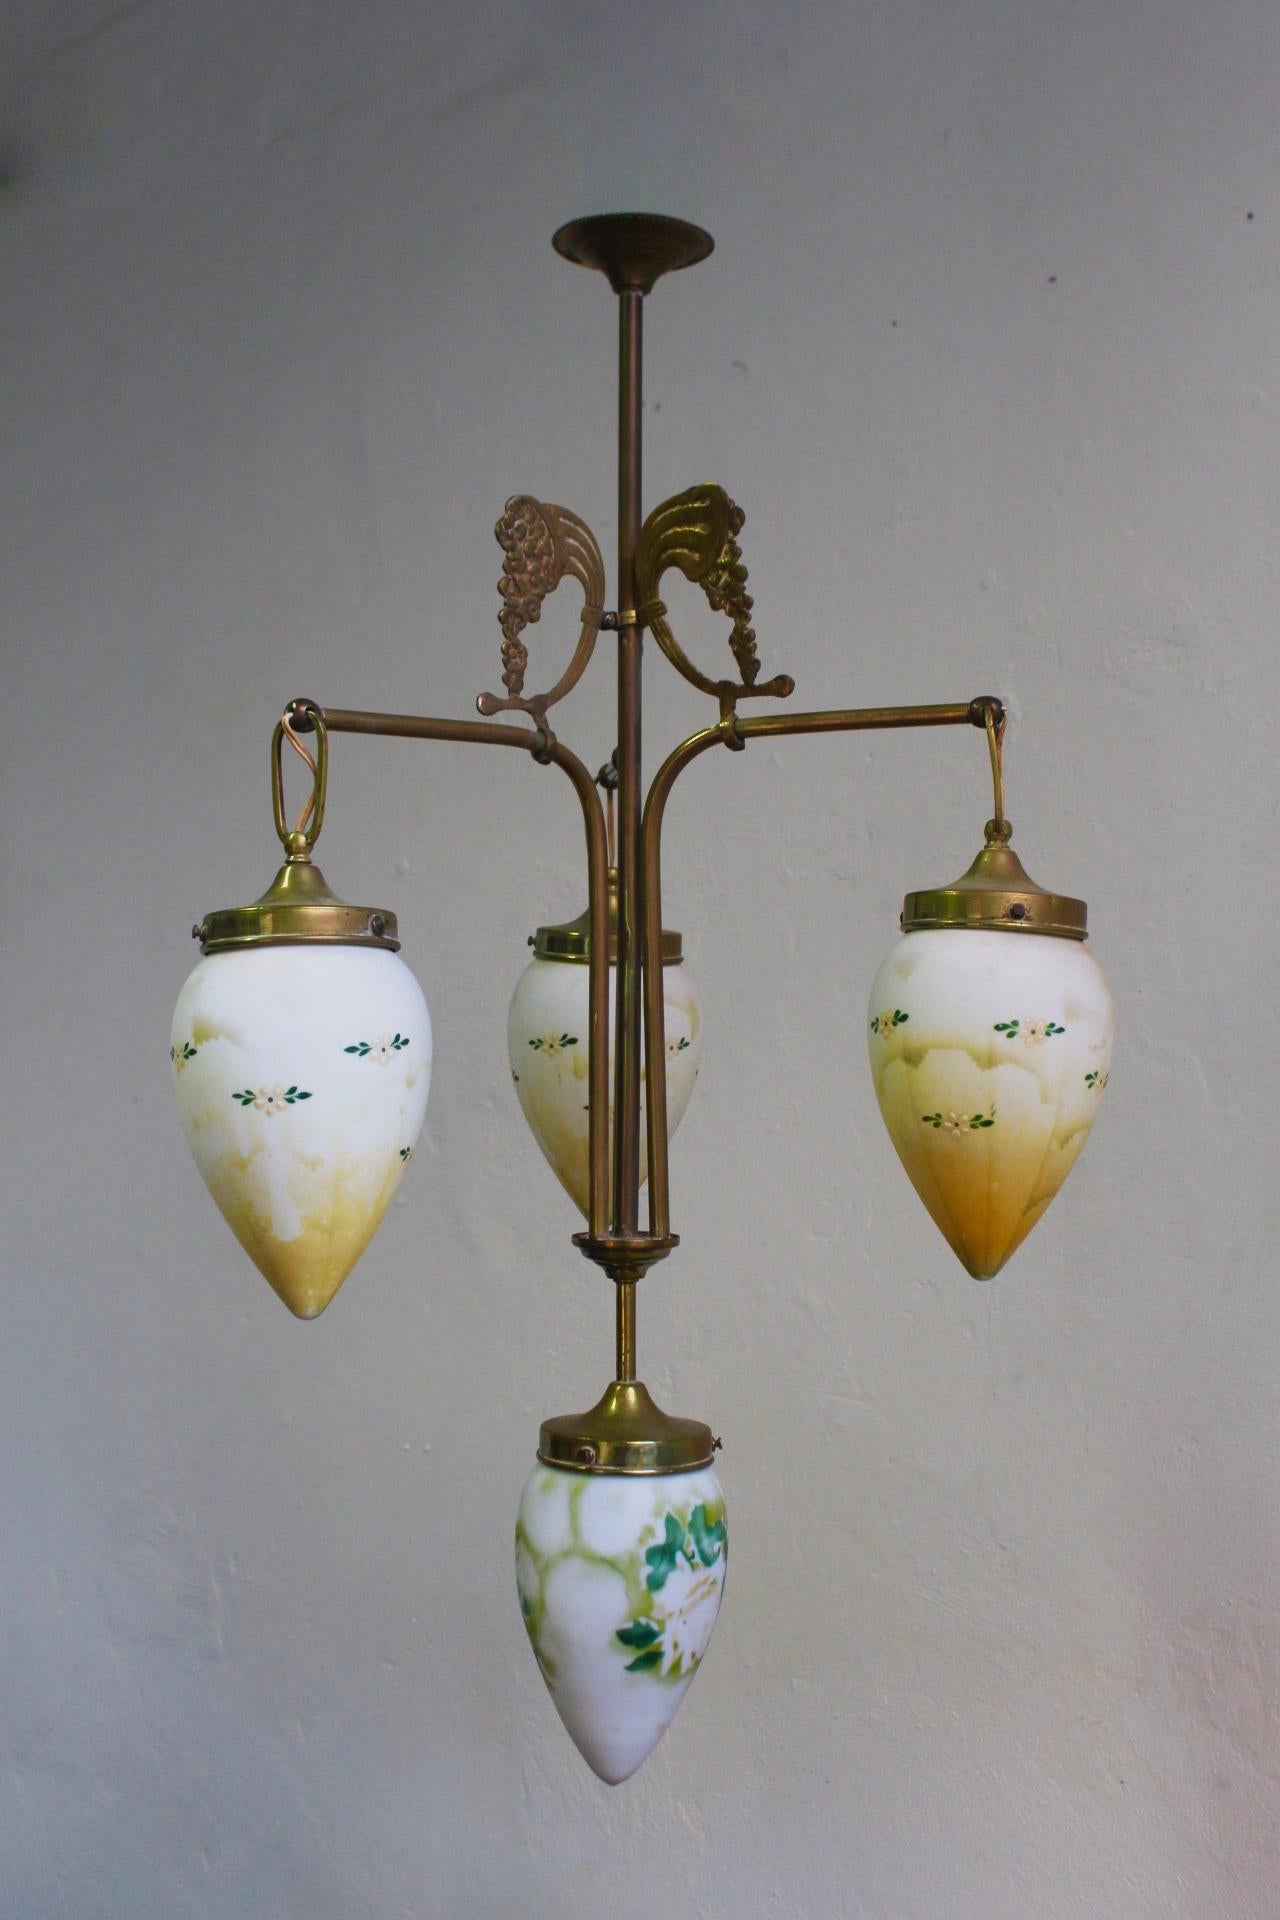 Unique antique Art Nouveau brass chandelier with hand painted milk glass shades, Spain, late 19th century.
The piece remains in good antique condition with wear due to age and use.
 